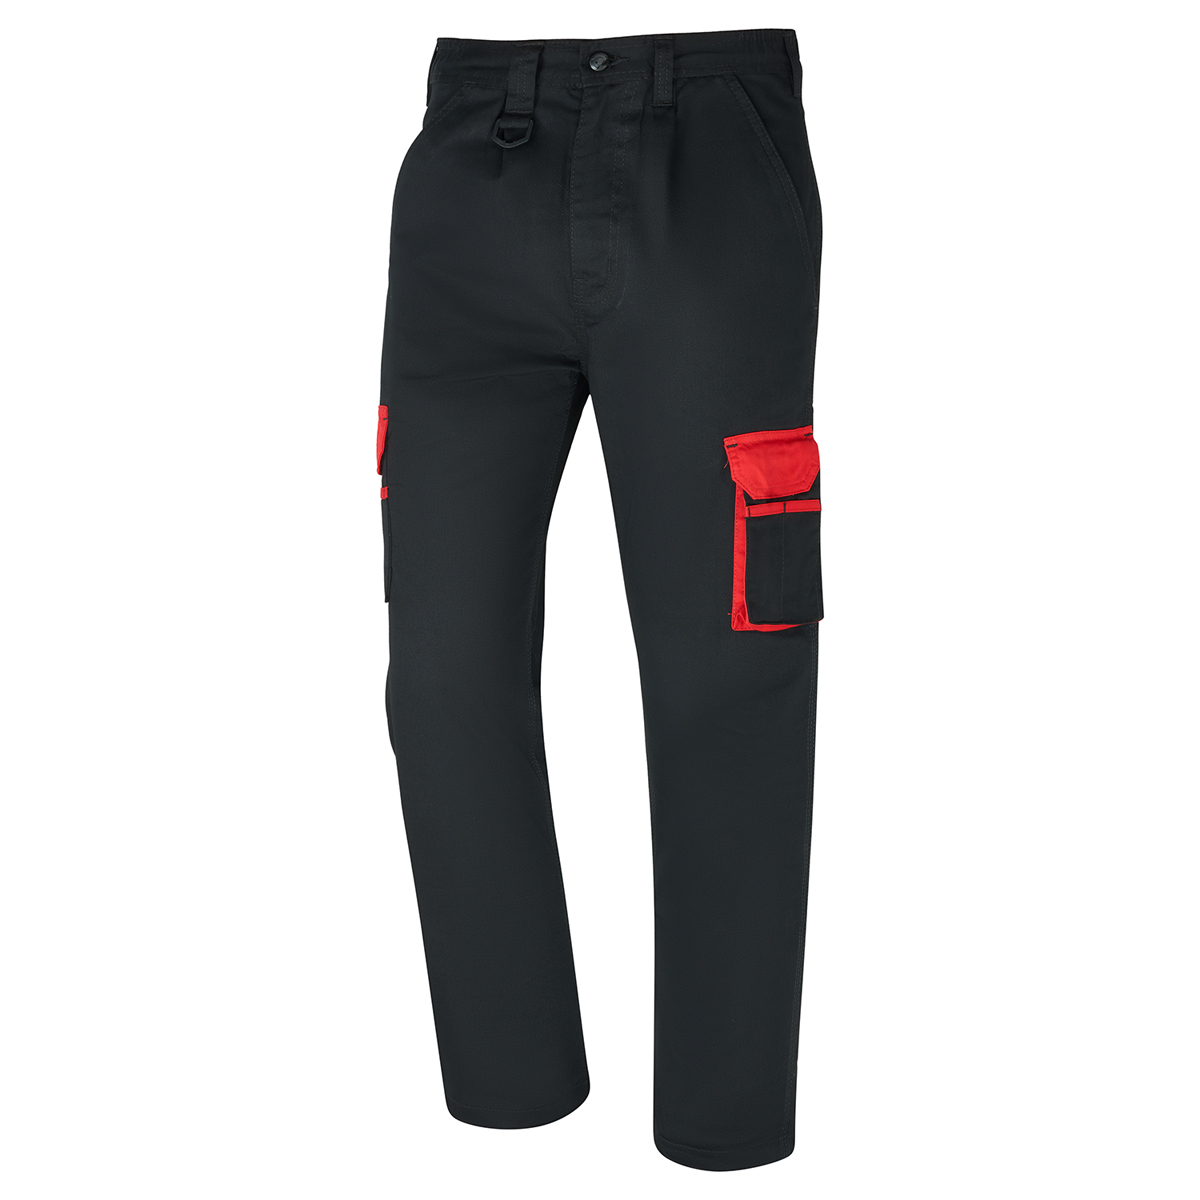 Silverswift two tone combat trouser - 34r - black / red